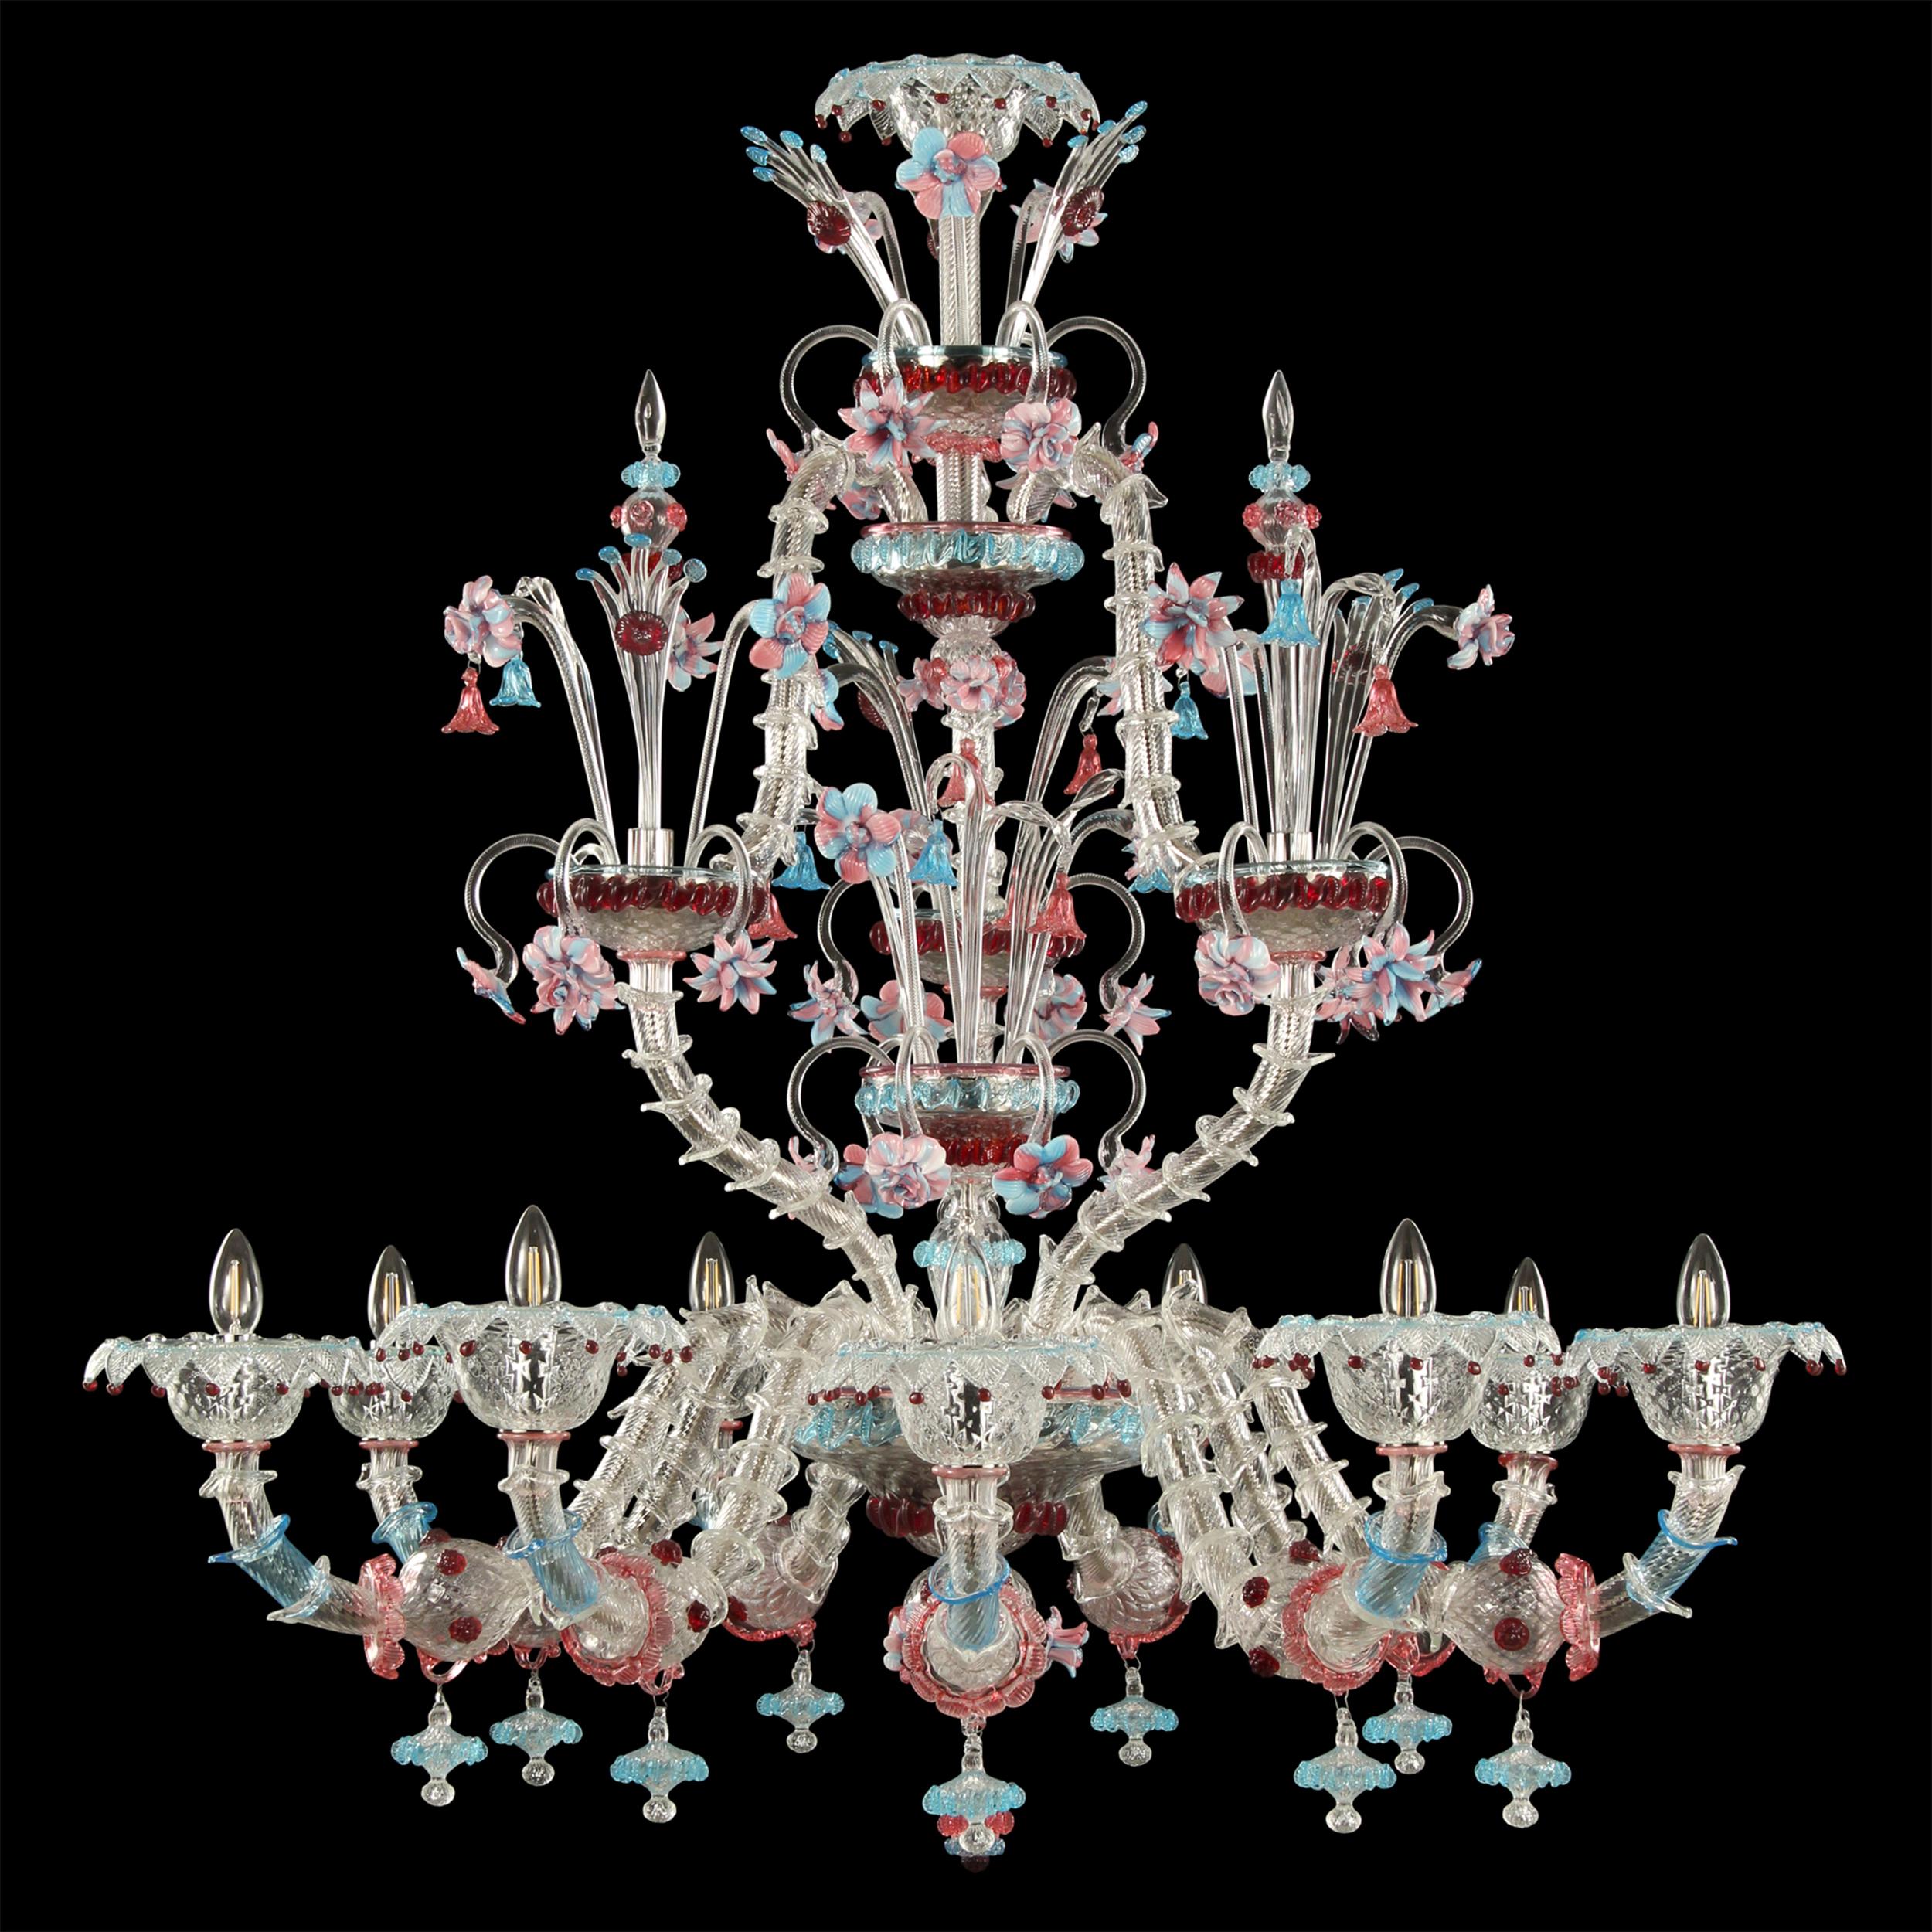 The Ca’ Rezzonico chandelier Villa Borghese, together with Villa Medici, is our collection inspired from the splendour of the noble italian families and of their dwellings. This blown glass chandelier is a large Ca’ Rezzonico model, embellished with